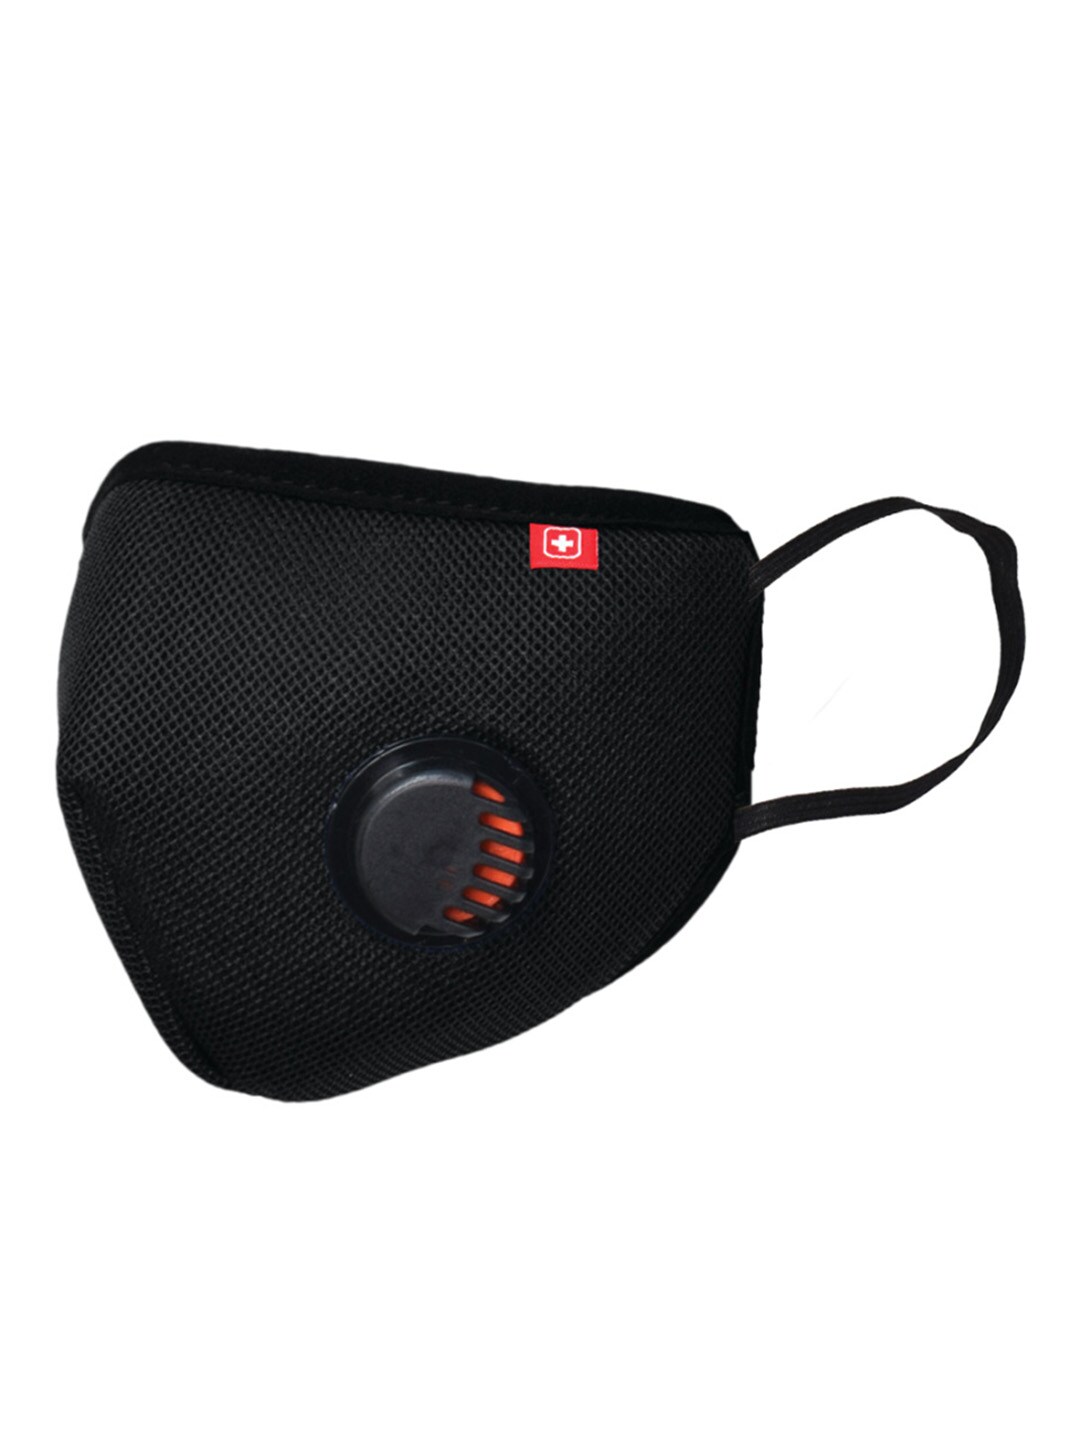 SWISS MILITARY Unisex Black 3-Ply Valved Anti-Bacterial Reusable A95+ Mask Price in India